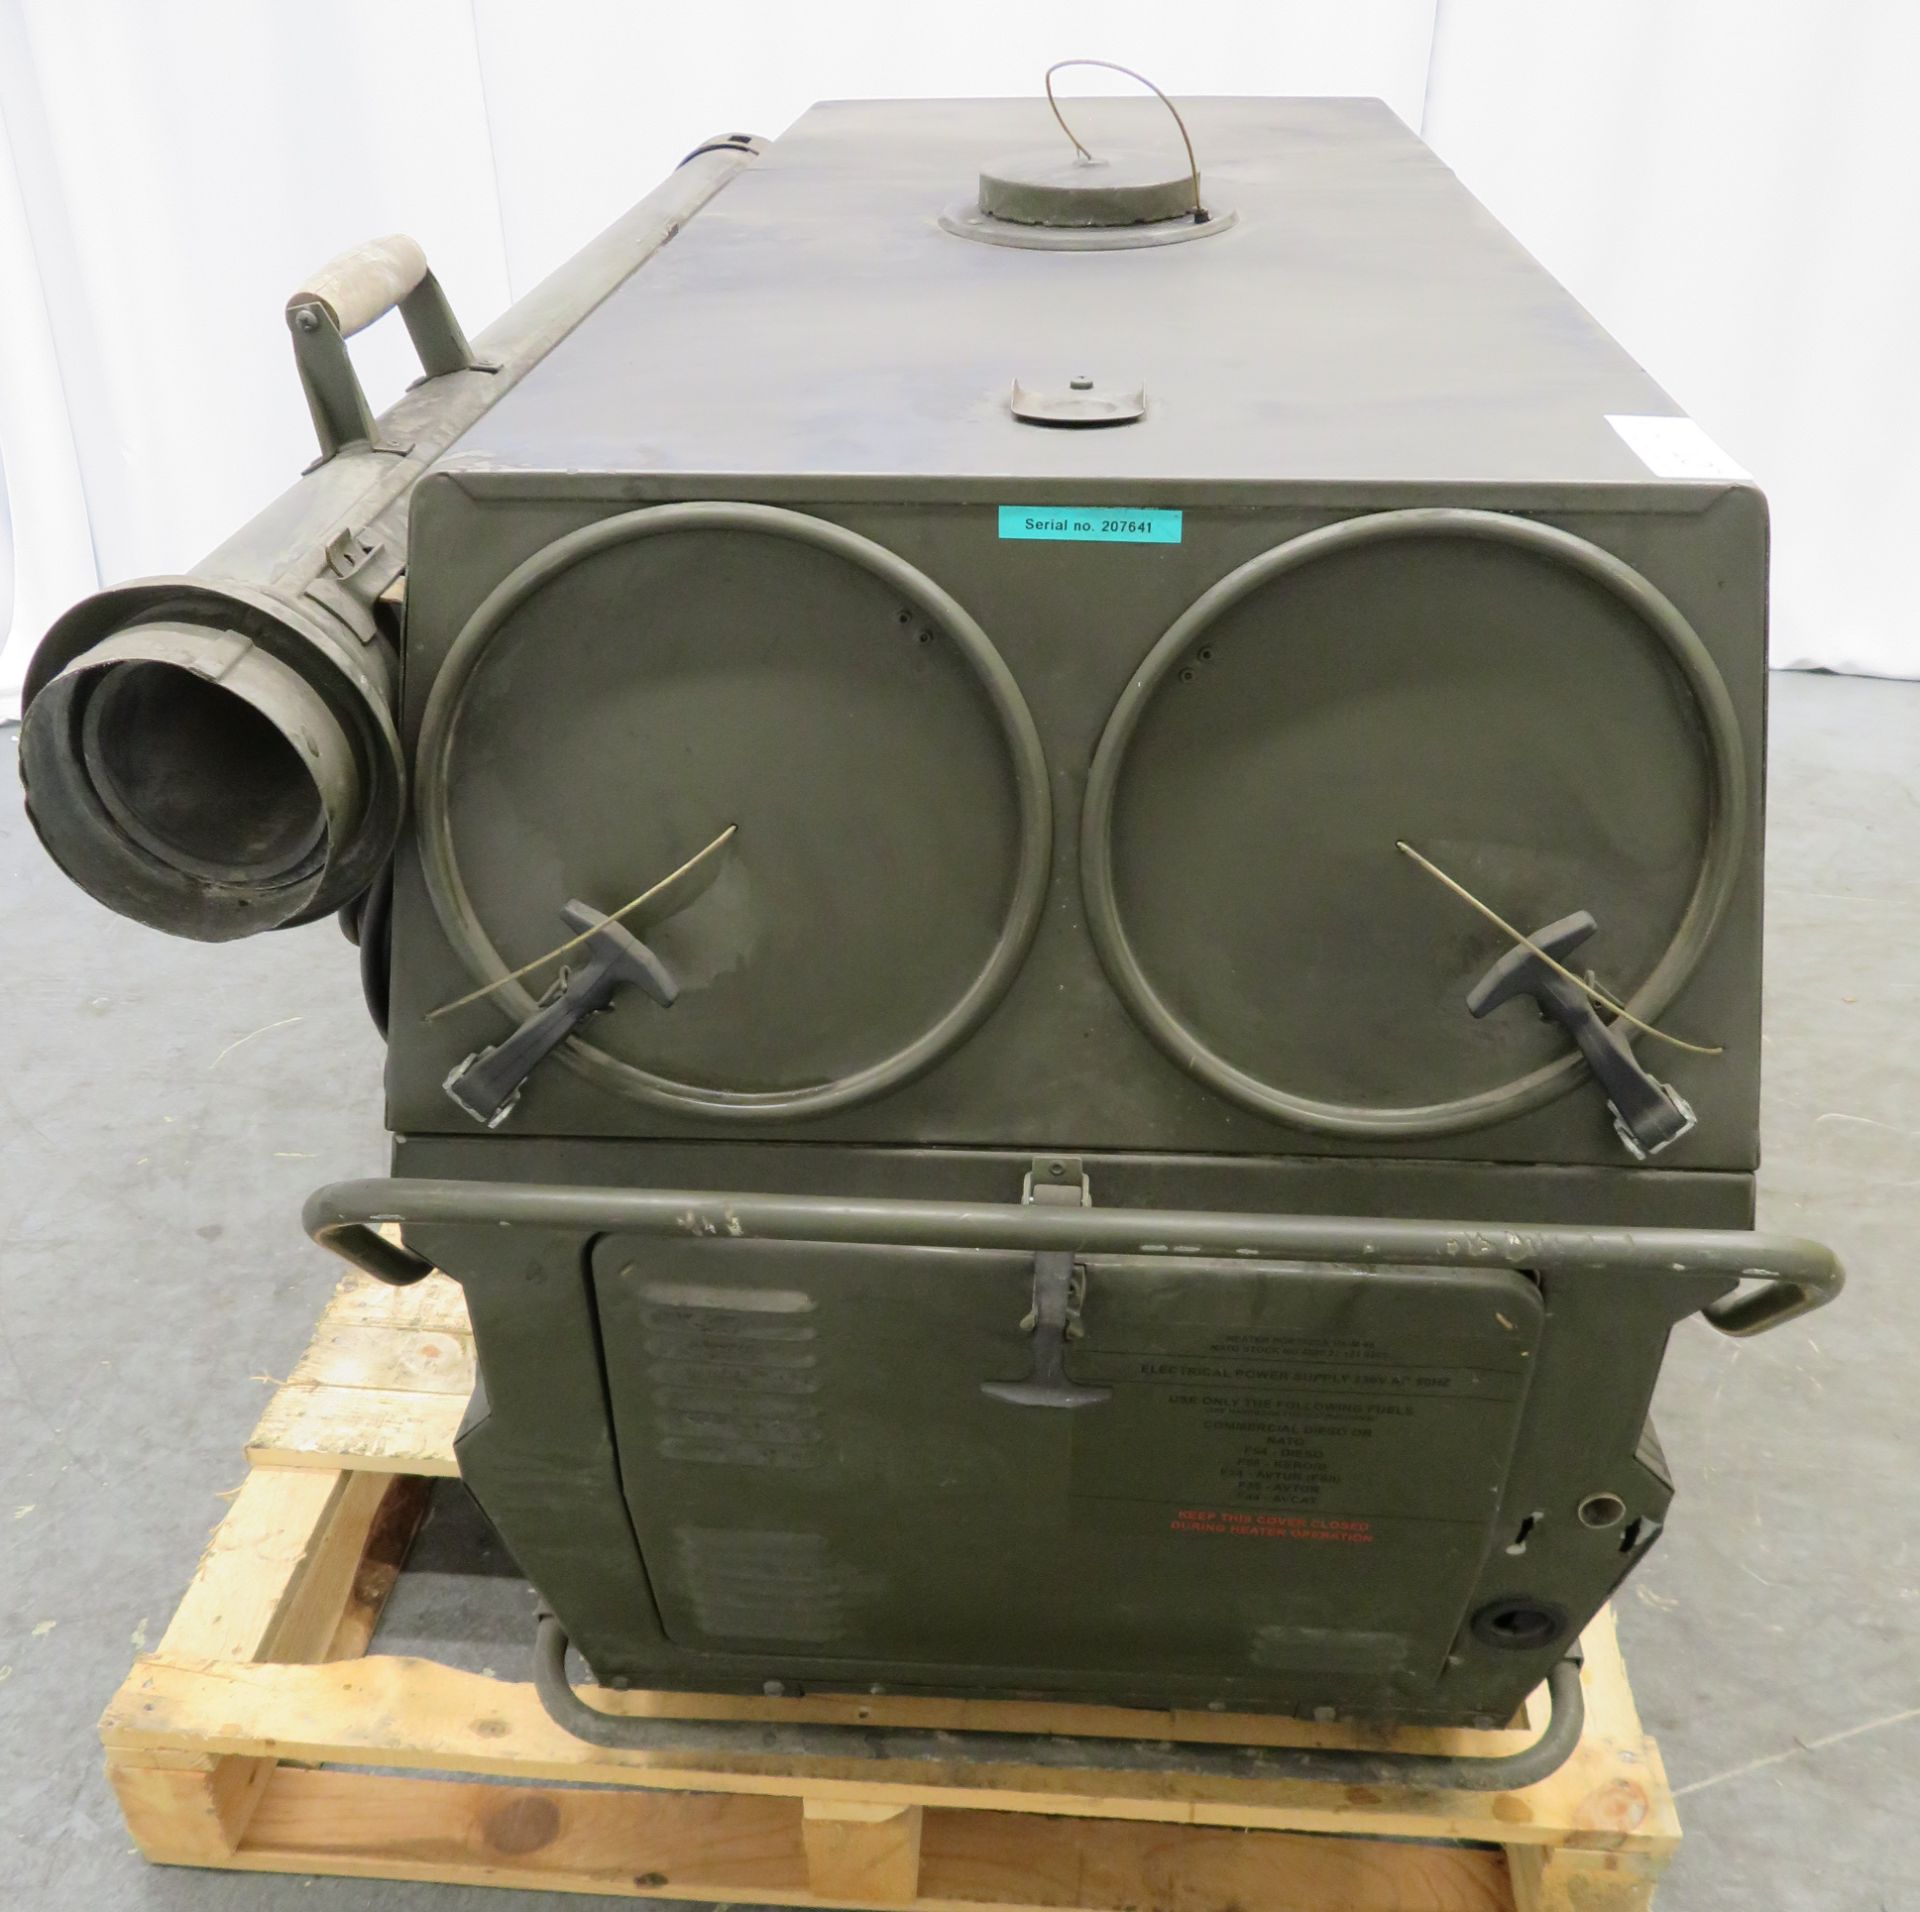 Dantherm 38kw Portable Diesel Fuel Heater VA-M40 - Hours Run - 319 - Untested. - Image 5 of 15